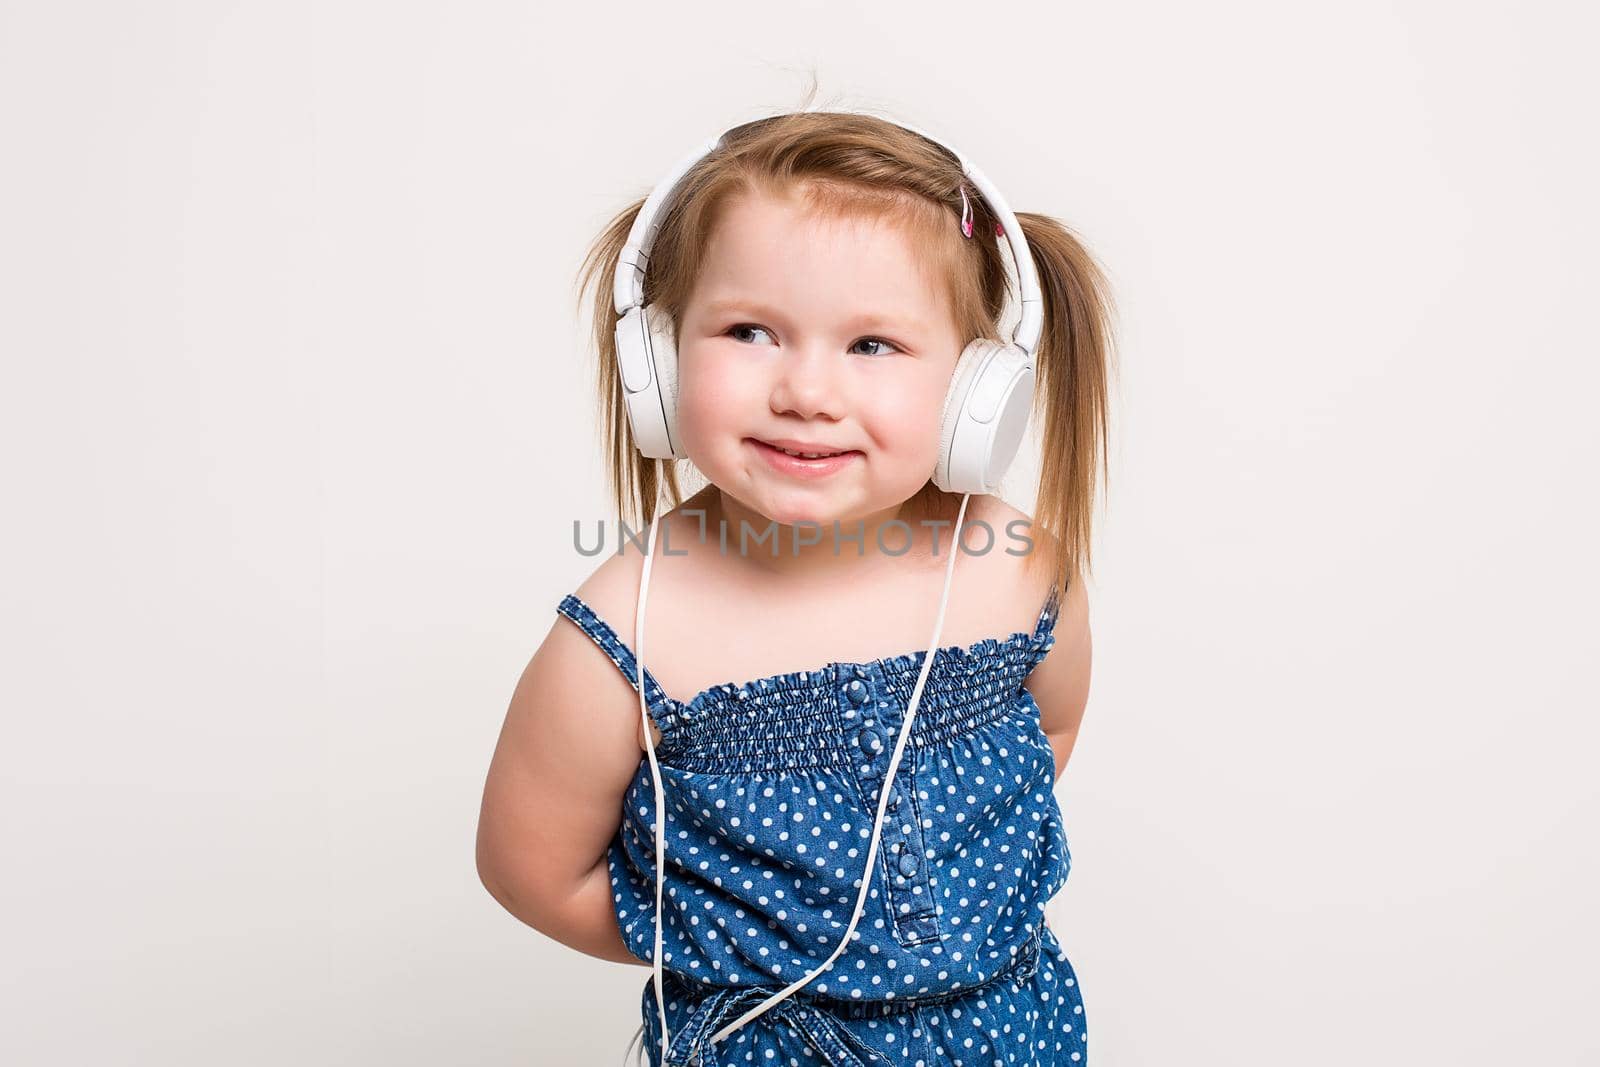 Cute little girl in headphones listening to music using a tablet and smiling on white background. The child does not look at the camera